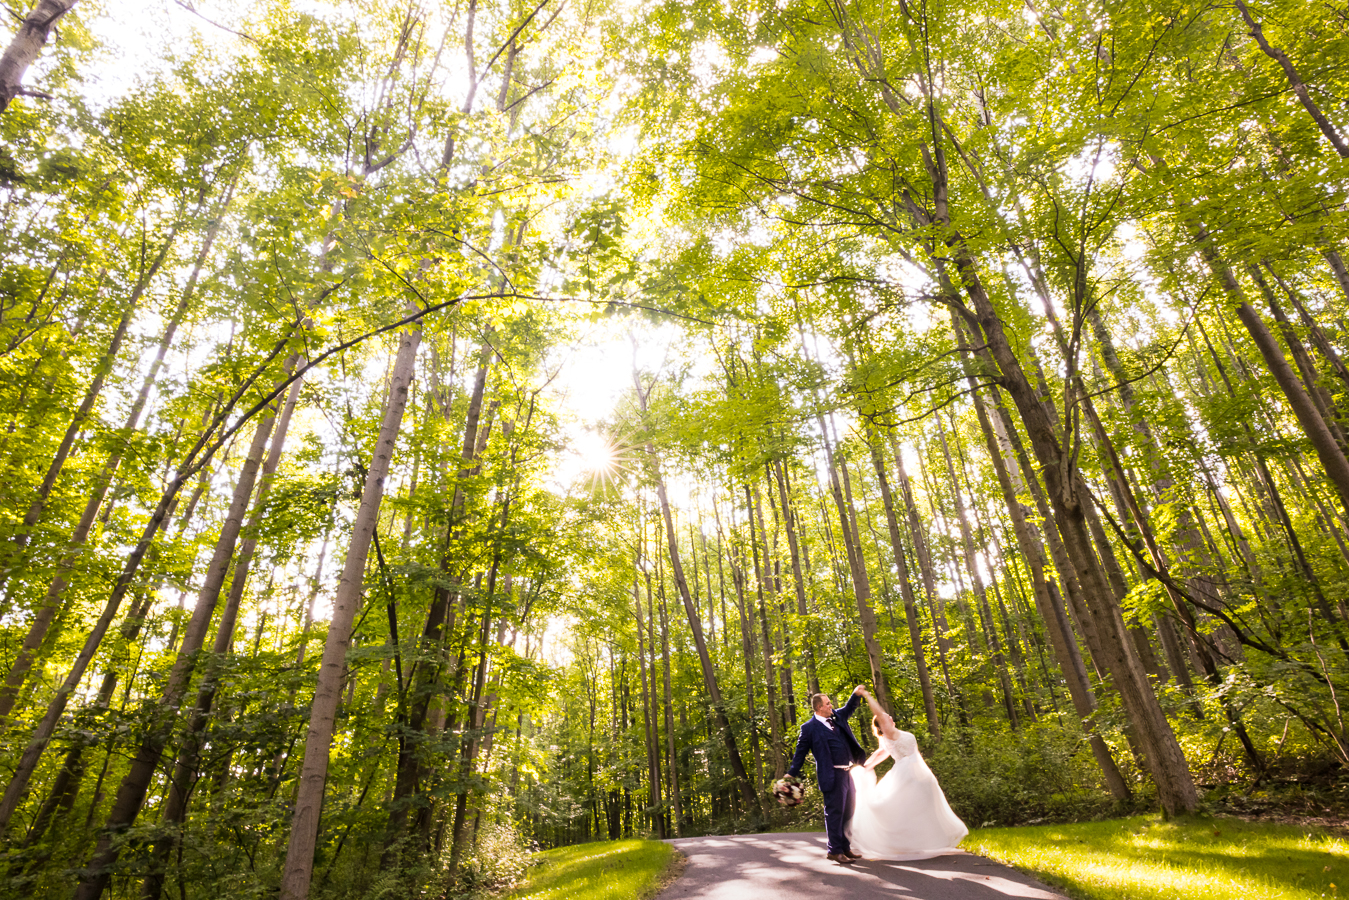 Oak Lodge Wedding Photographer, rhinehart photography, captures this romantic portrait of the couple as they walk through the woods while spinning the bride around as they are surrounded by the vibrant, tall green trees and landscaping 